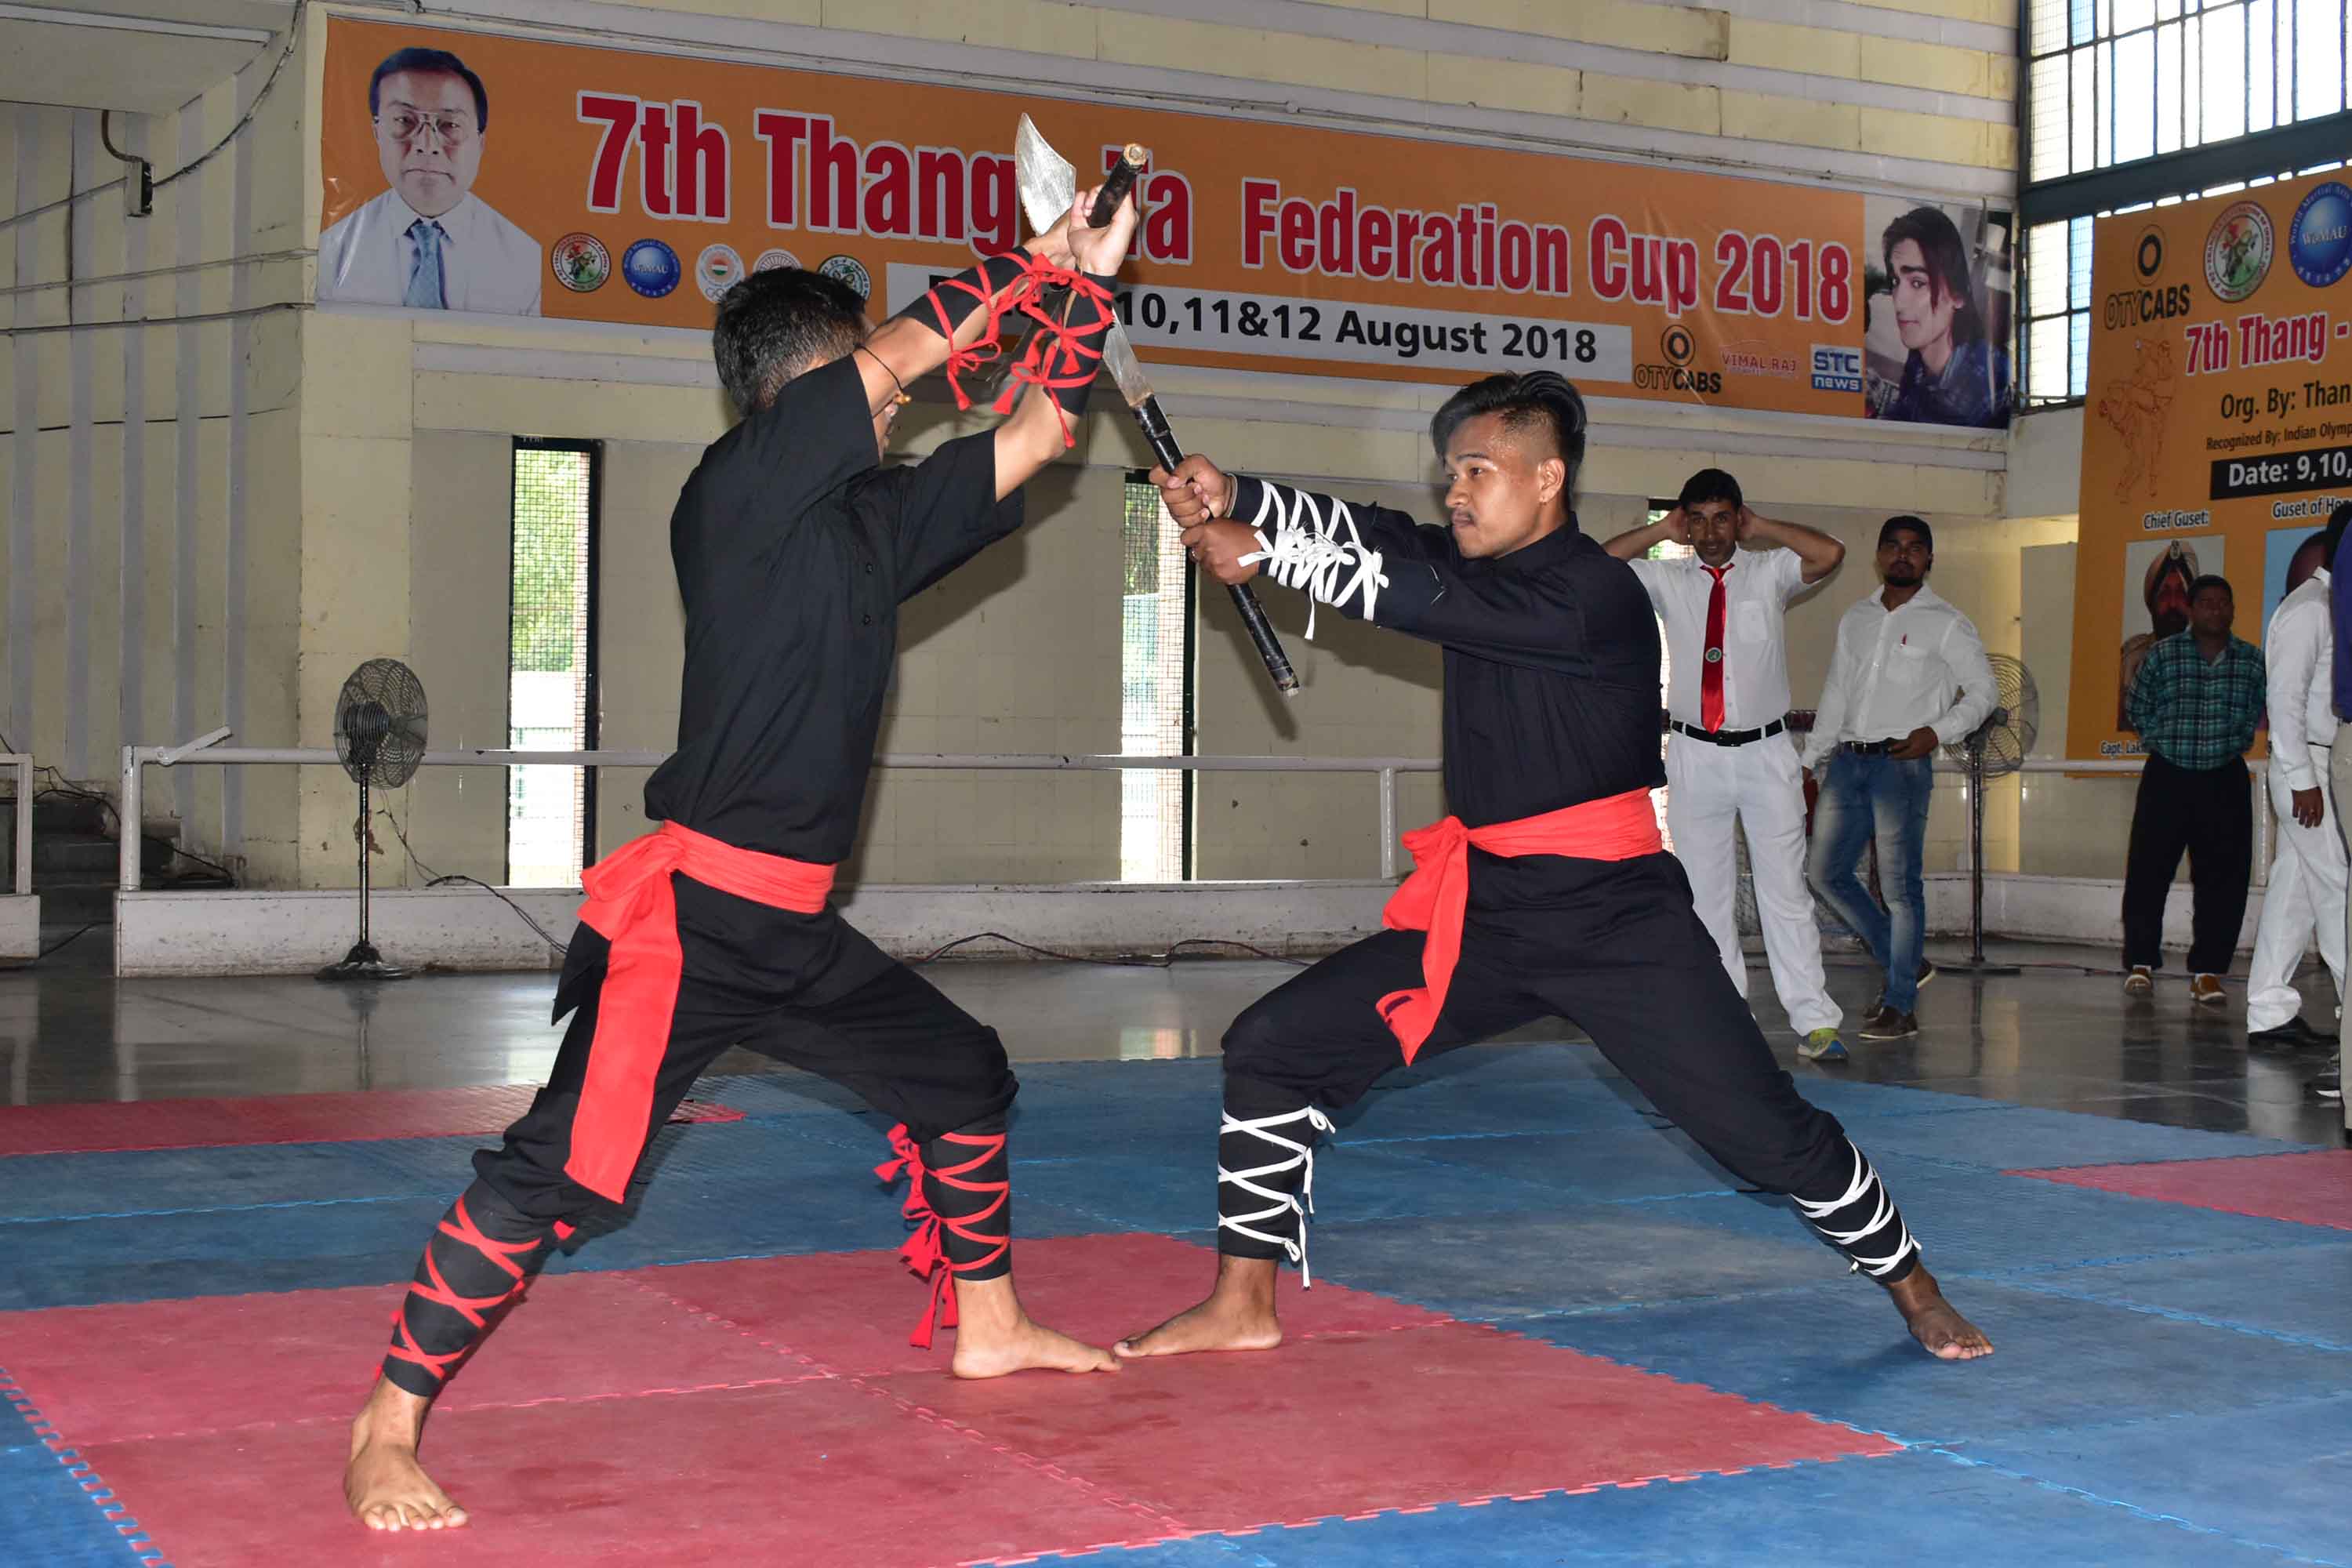 7th Thang-Ta Federation Cup 2018